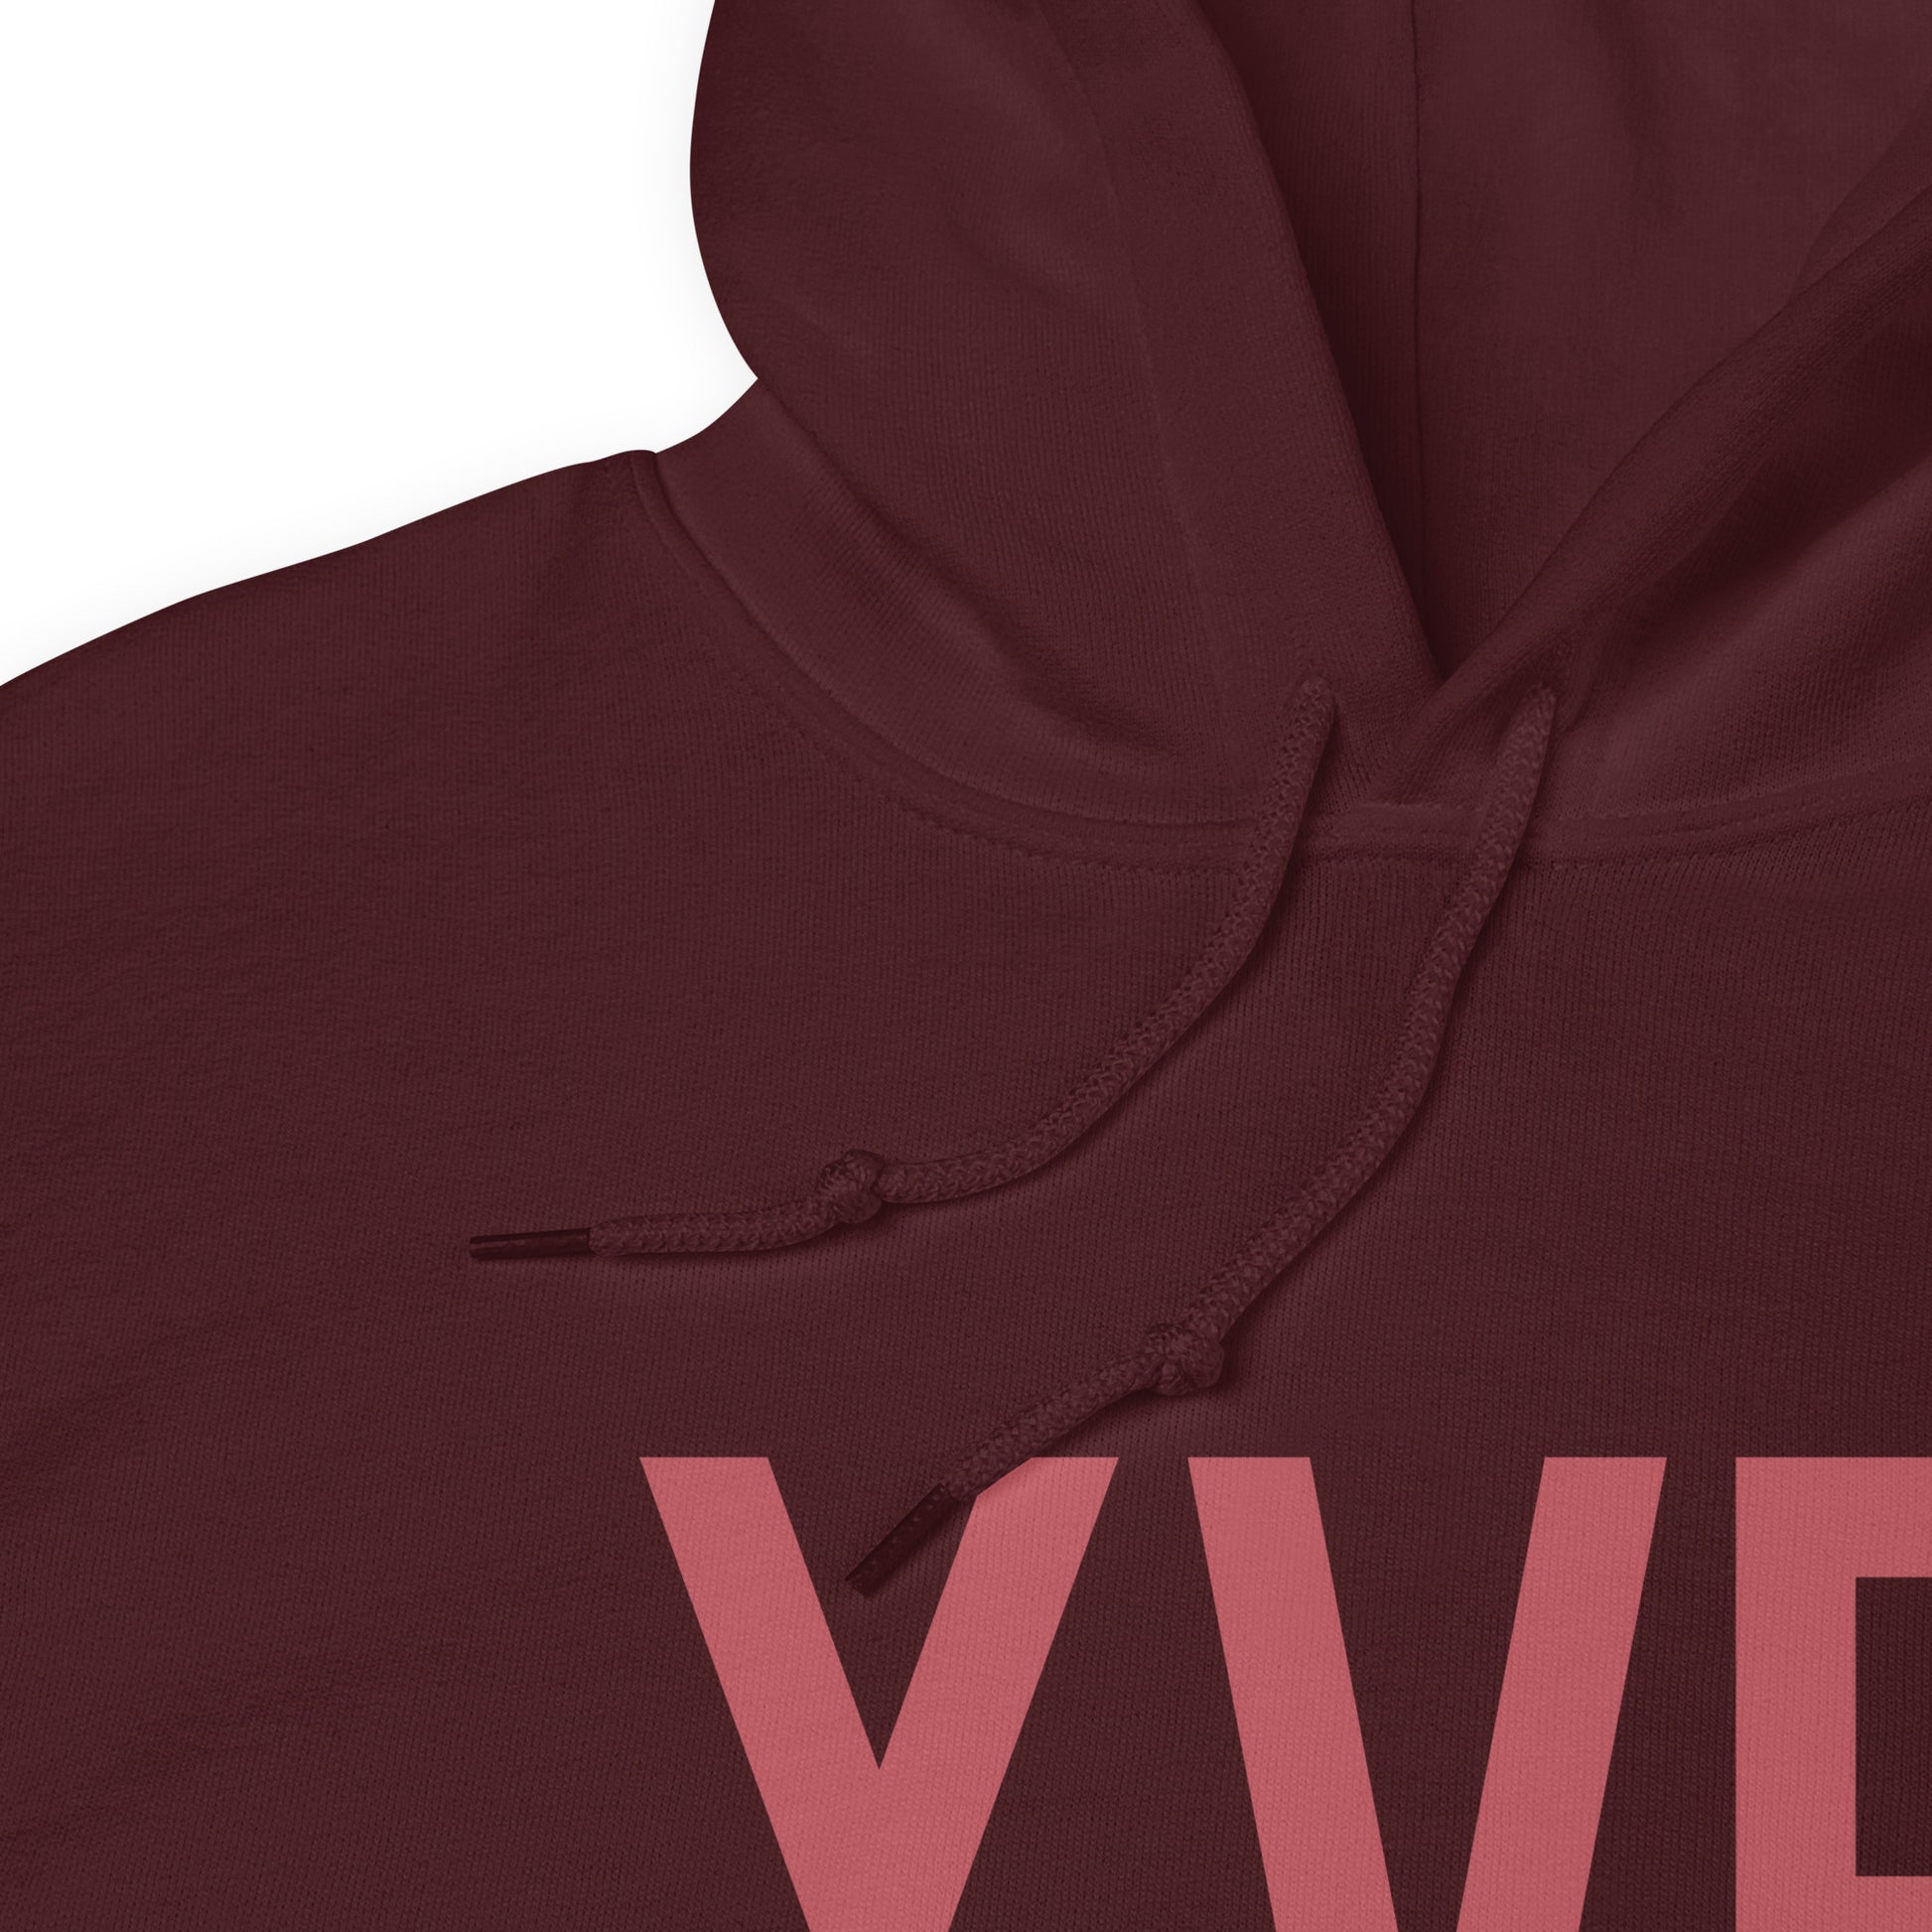 Aviation Enthusiast Hoodie - Deep Pink Graphic • YVR Vancouver • YHM Designs - Image 08